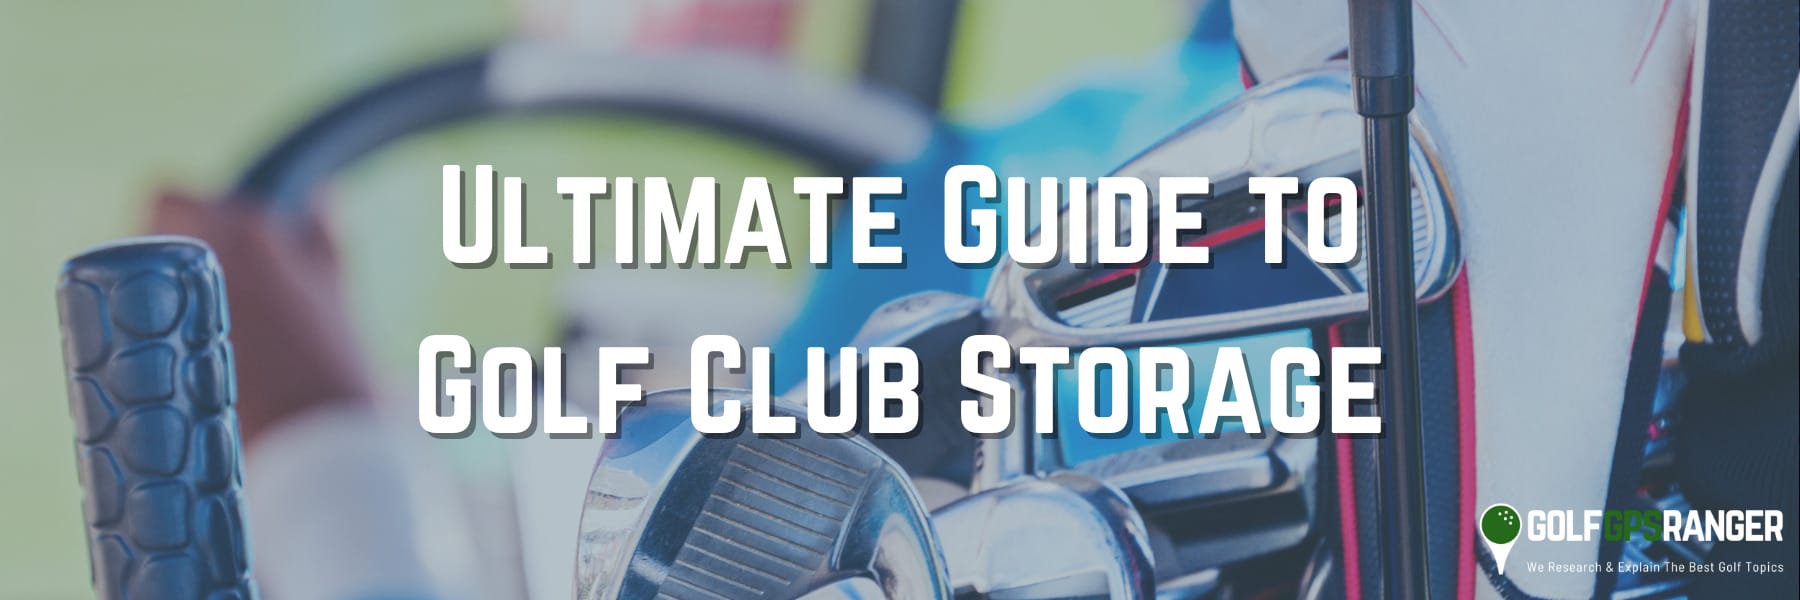 Ultimate Guide to Golf Club Storage Tips for Keeping Your Equipment Safe and Organized